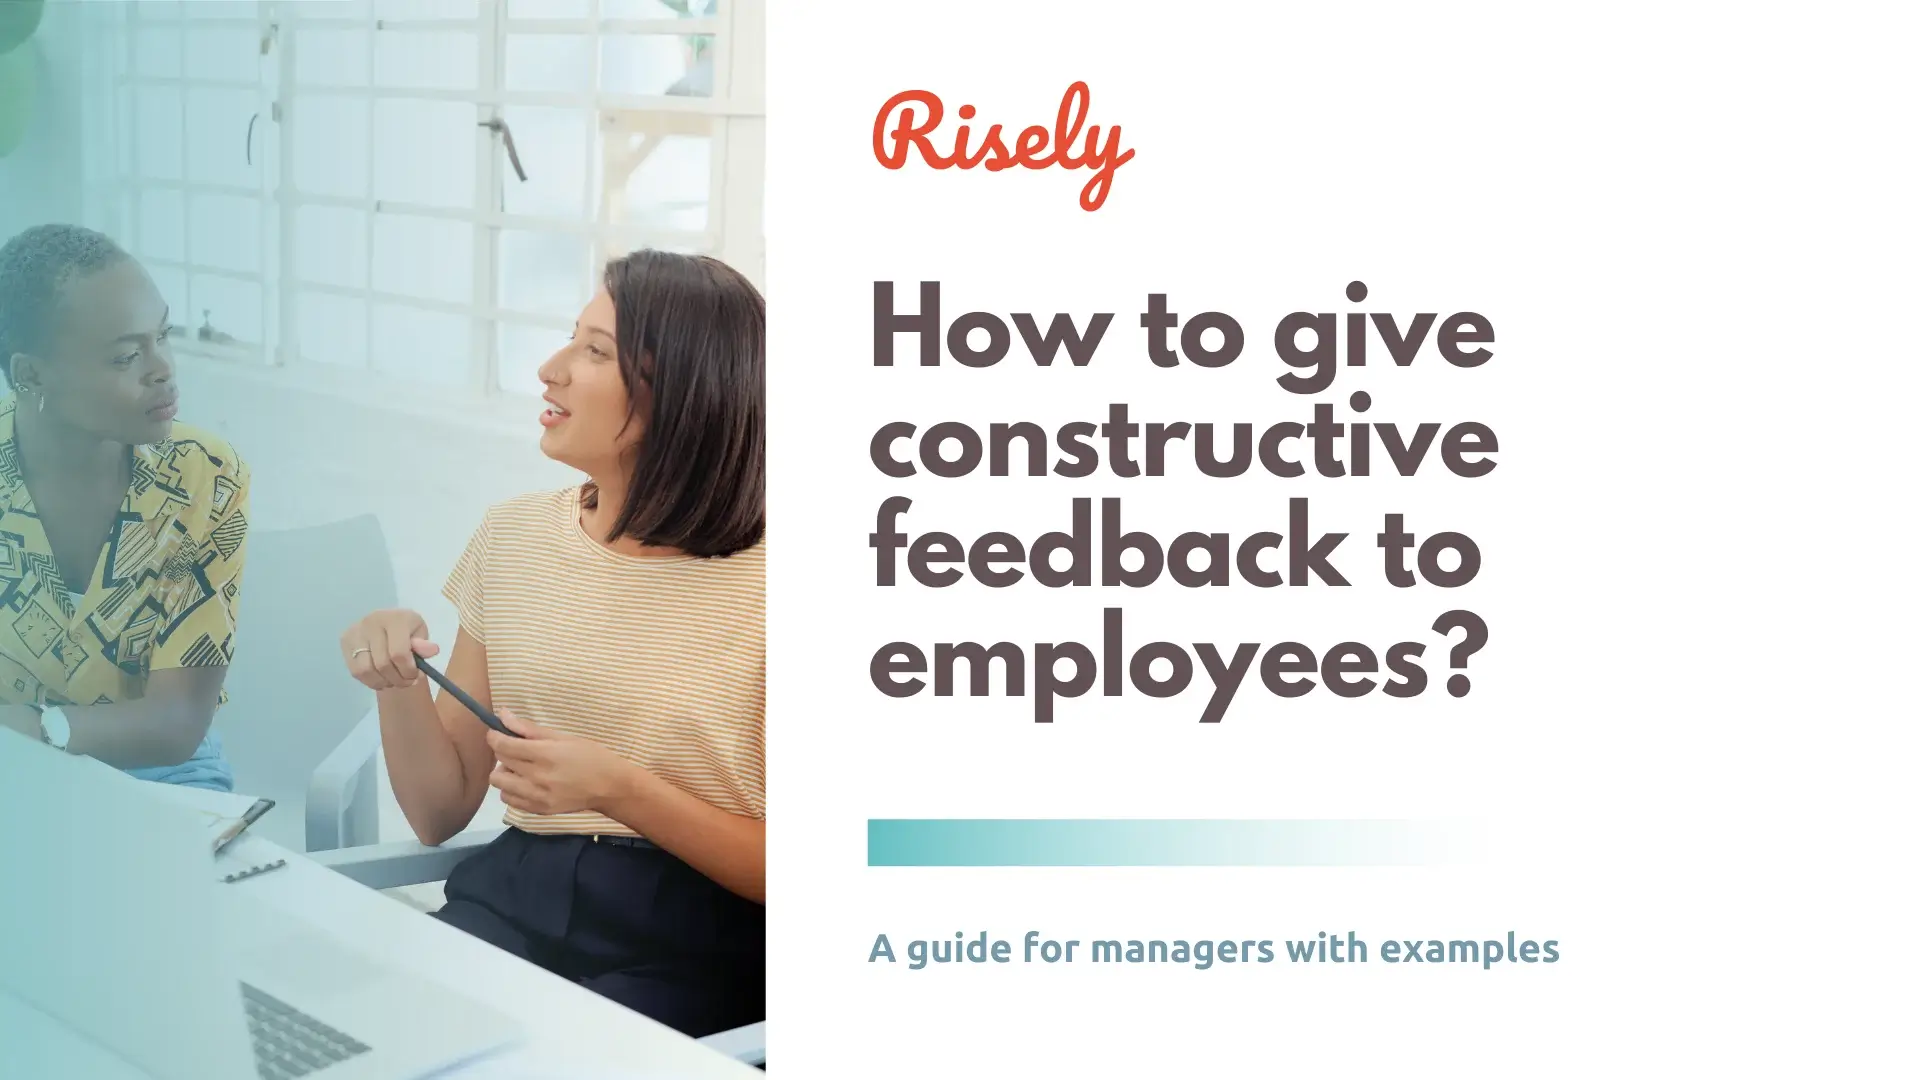 How to give constructive feedback to employees?